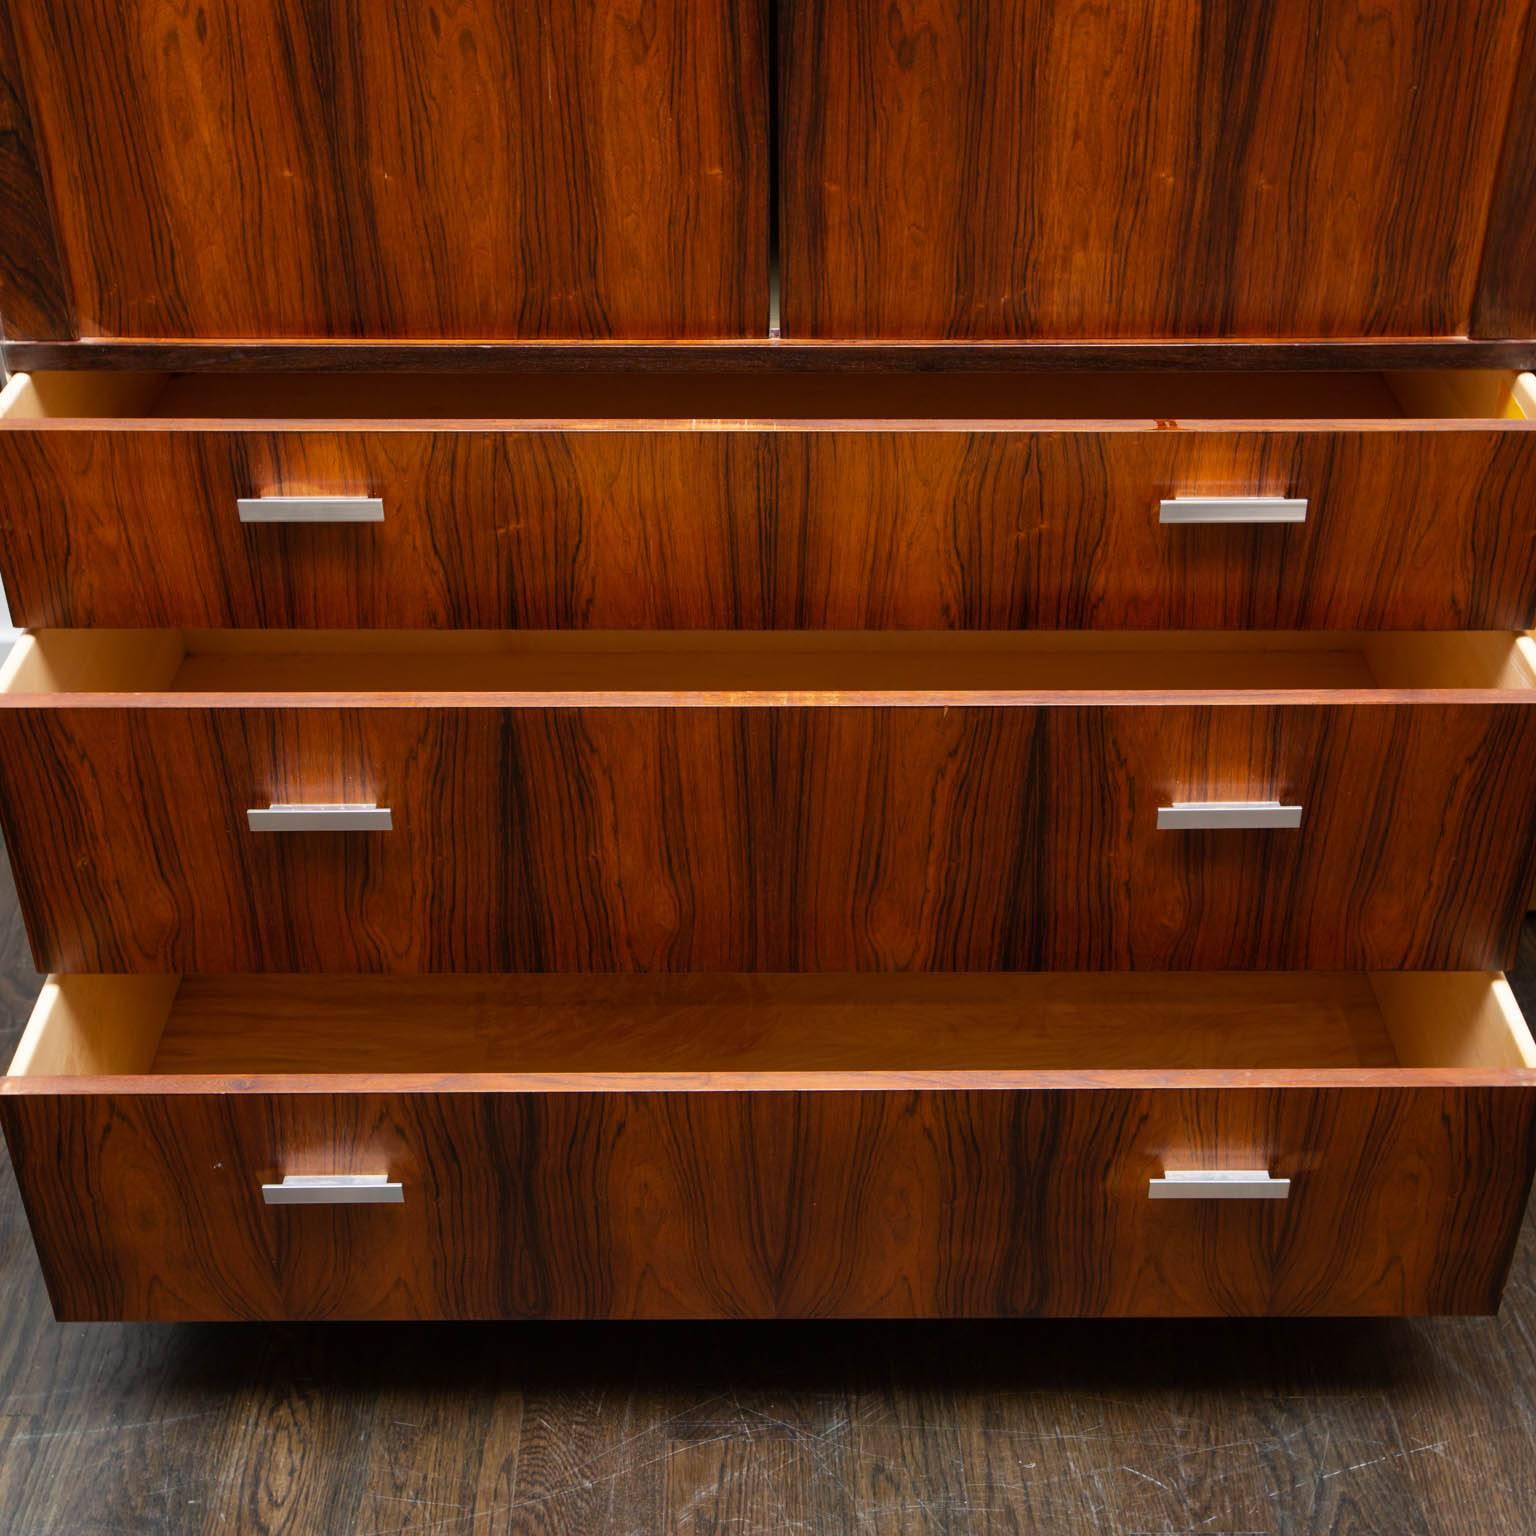 Made by Falster of Denmark. This chest features classic Danish-designed tambour doors that open to reveal nine birch wood drawers and a couple of shelves. These particular rosewood pieces by Falster were sold at Maurice Villency in New York and